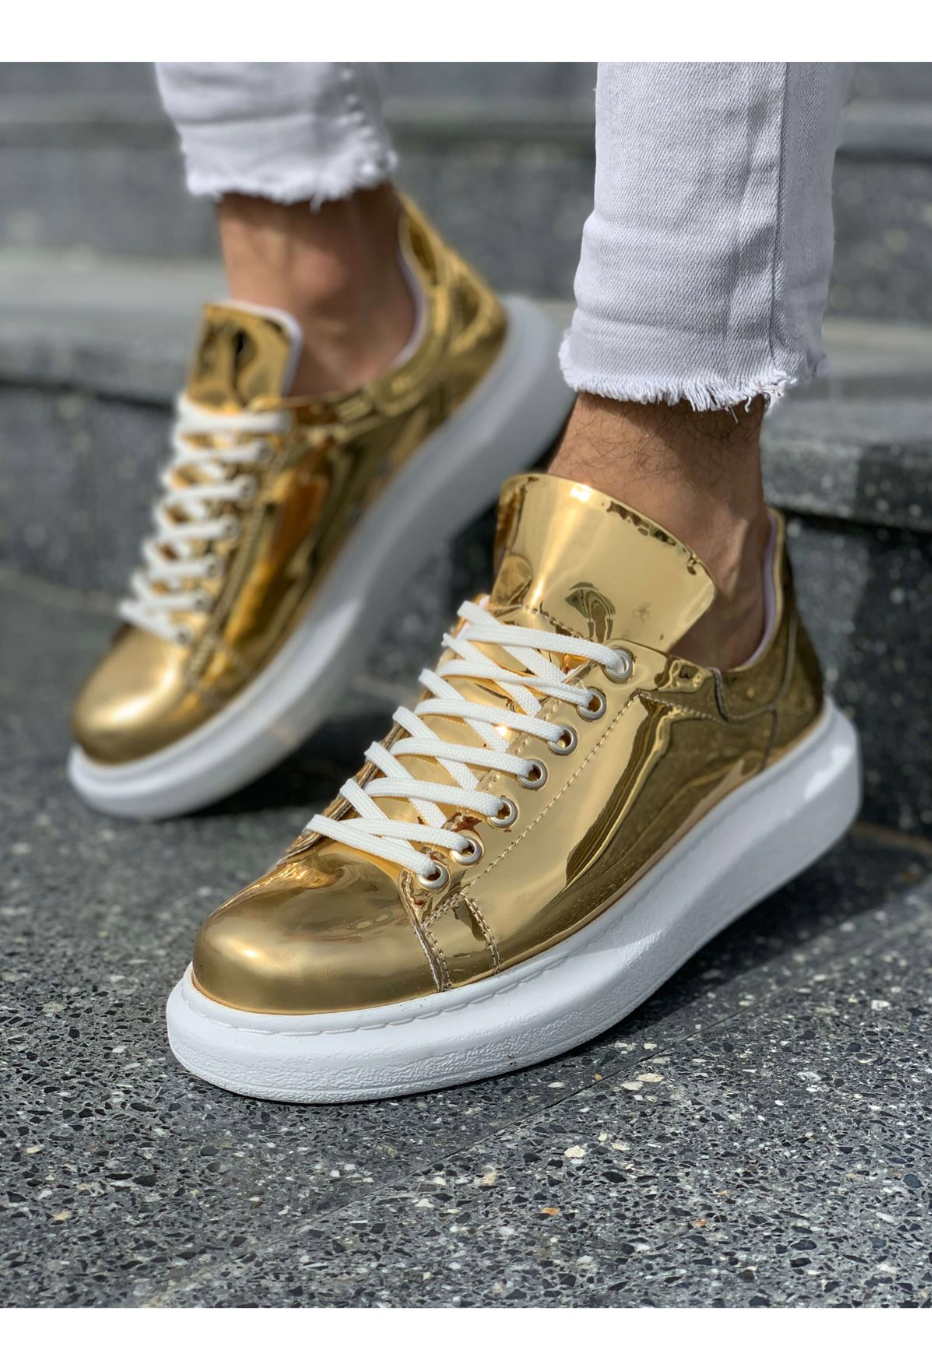 Solid Gold Sneakers Men's - Swagg Splash Sneakers